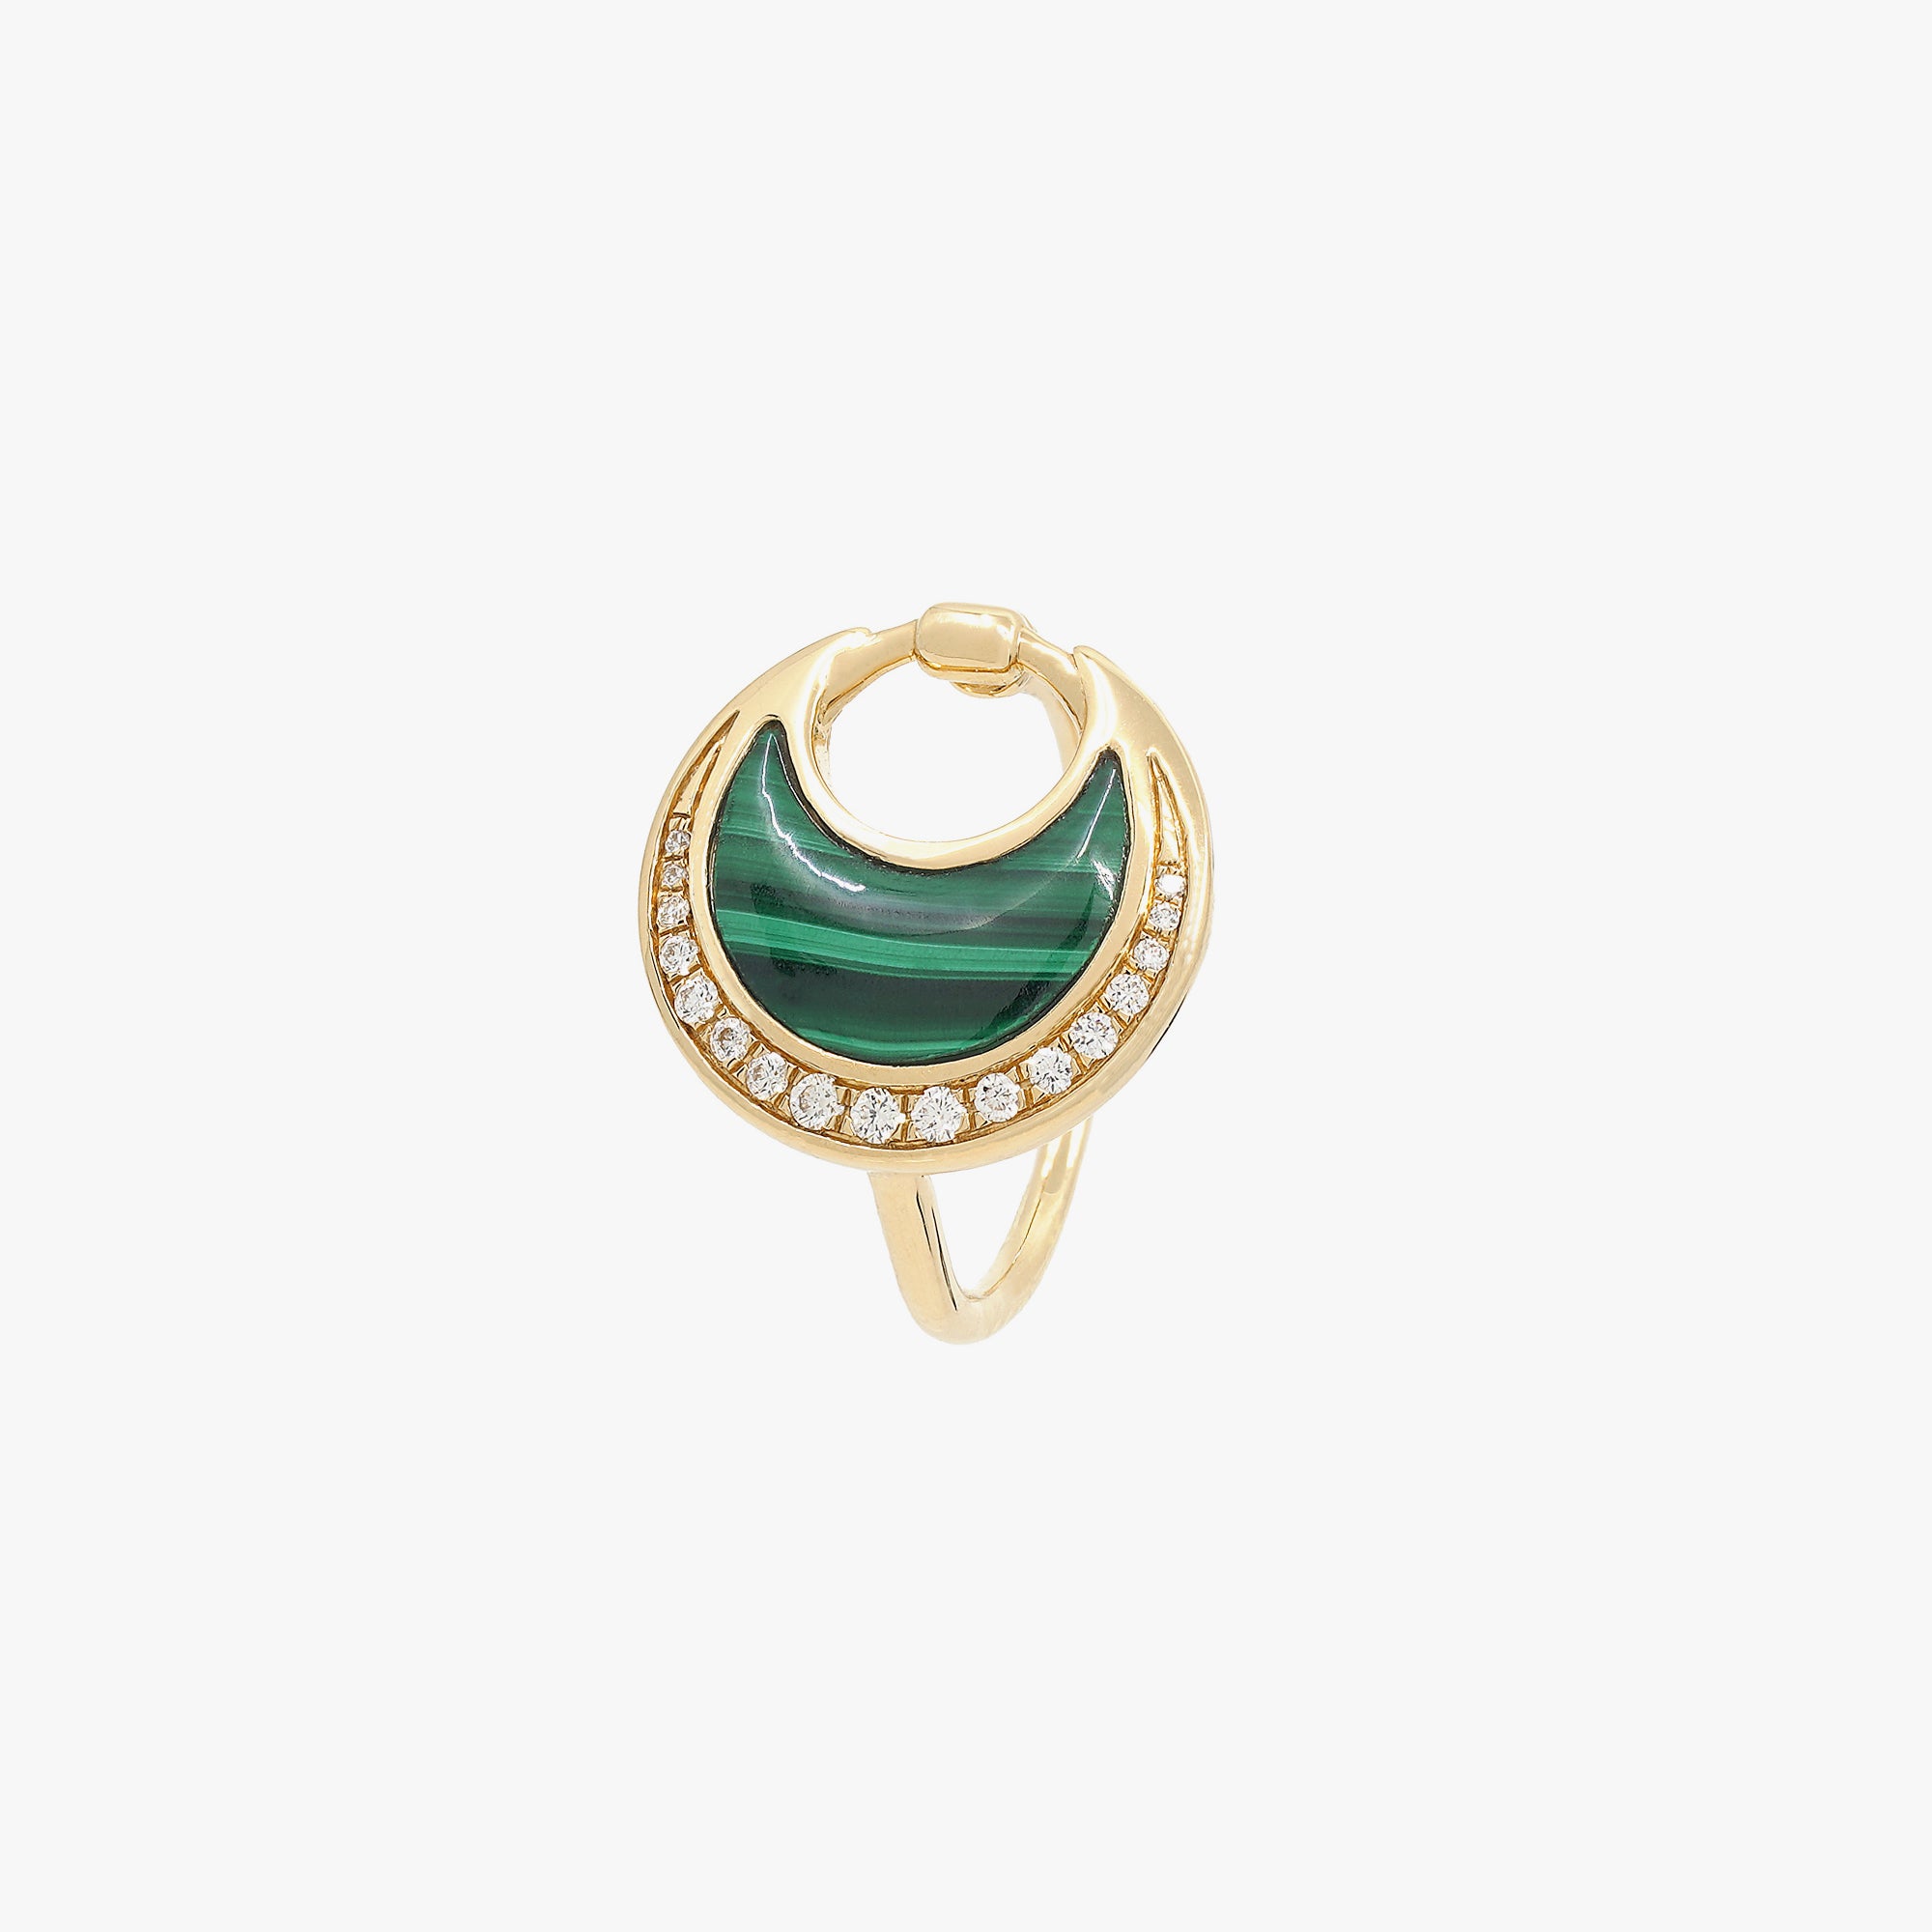 Al Hilal ring in yellow gold with malachite stone and diamonds